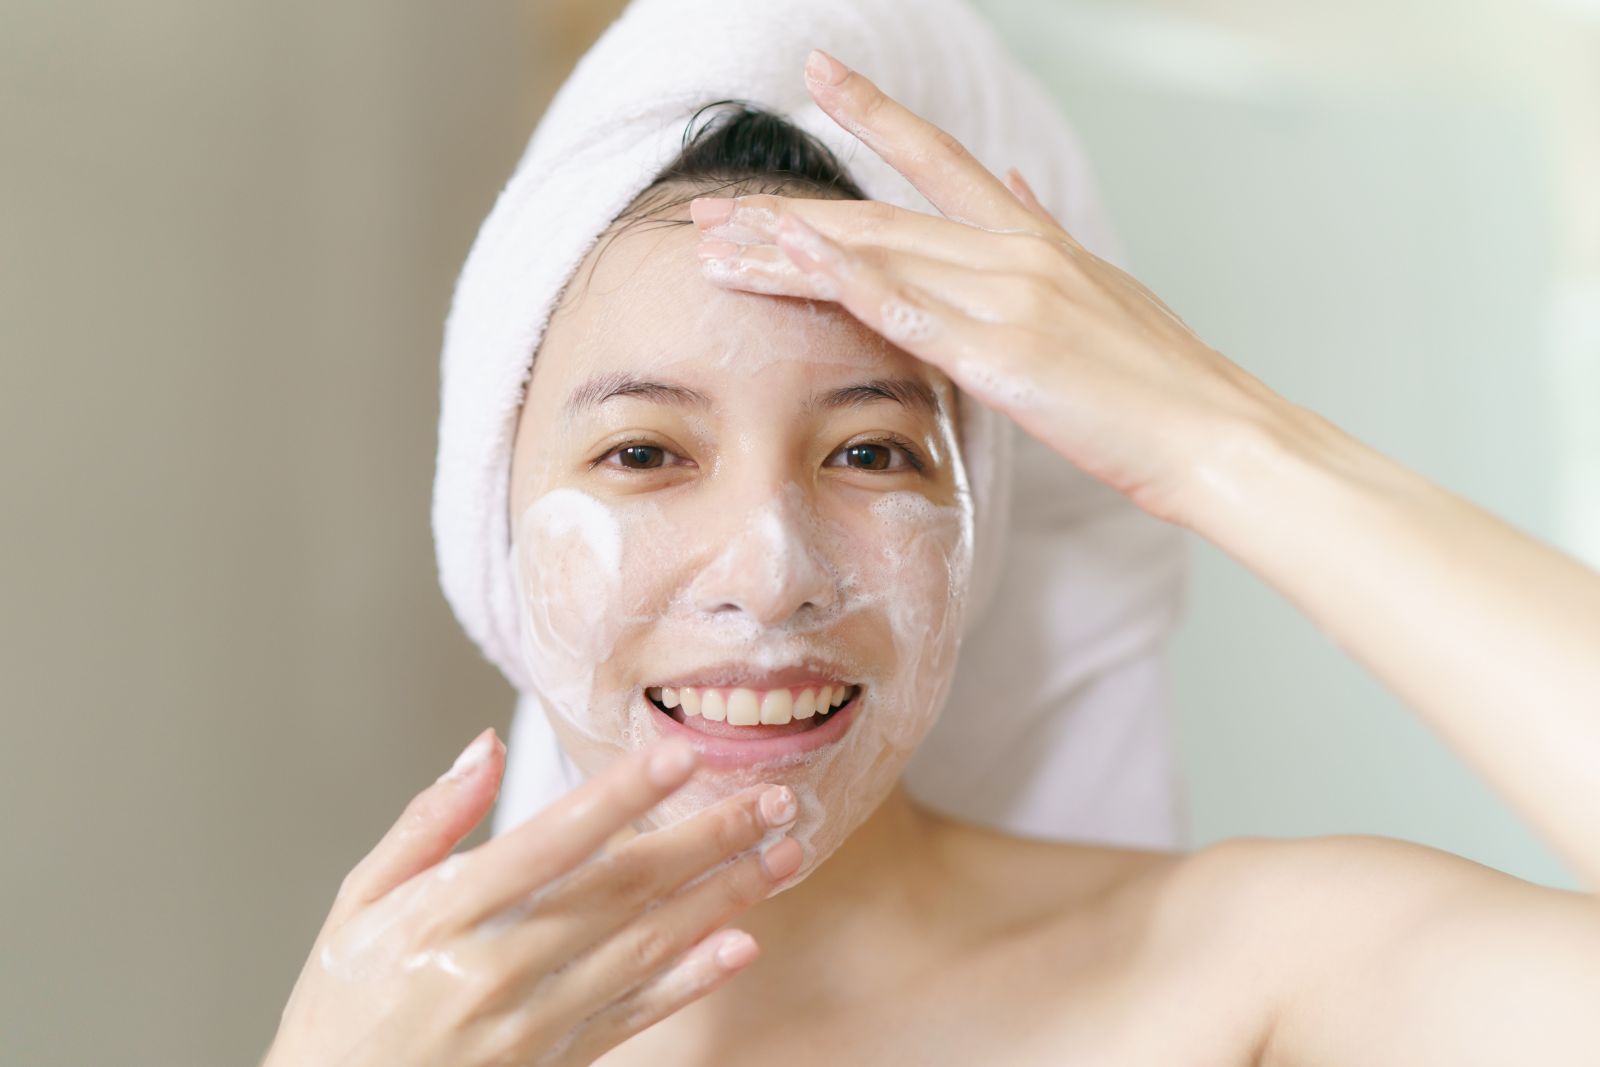 woman using Cleanser for her face